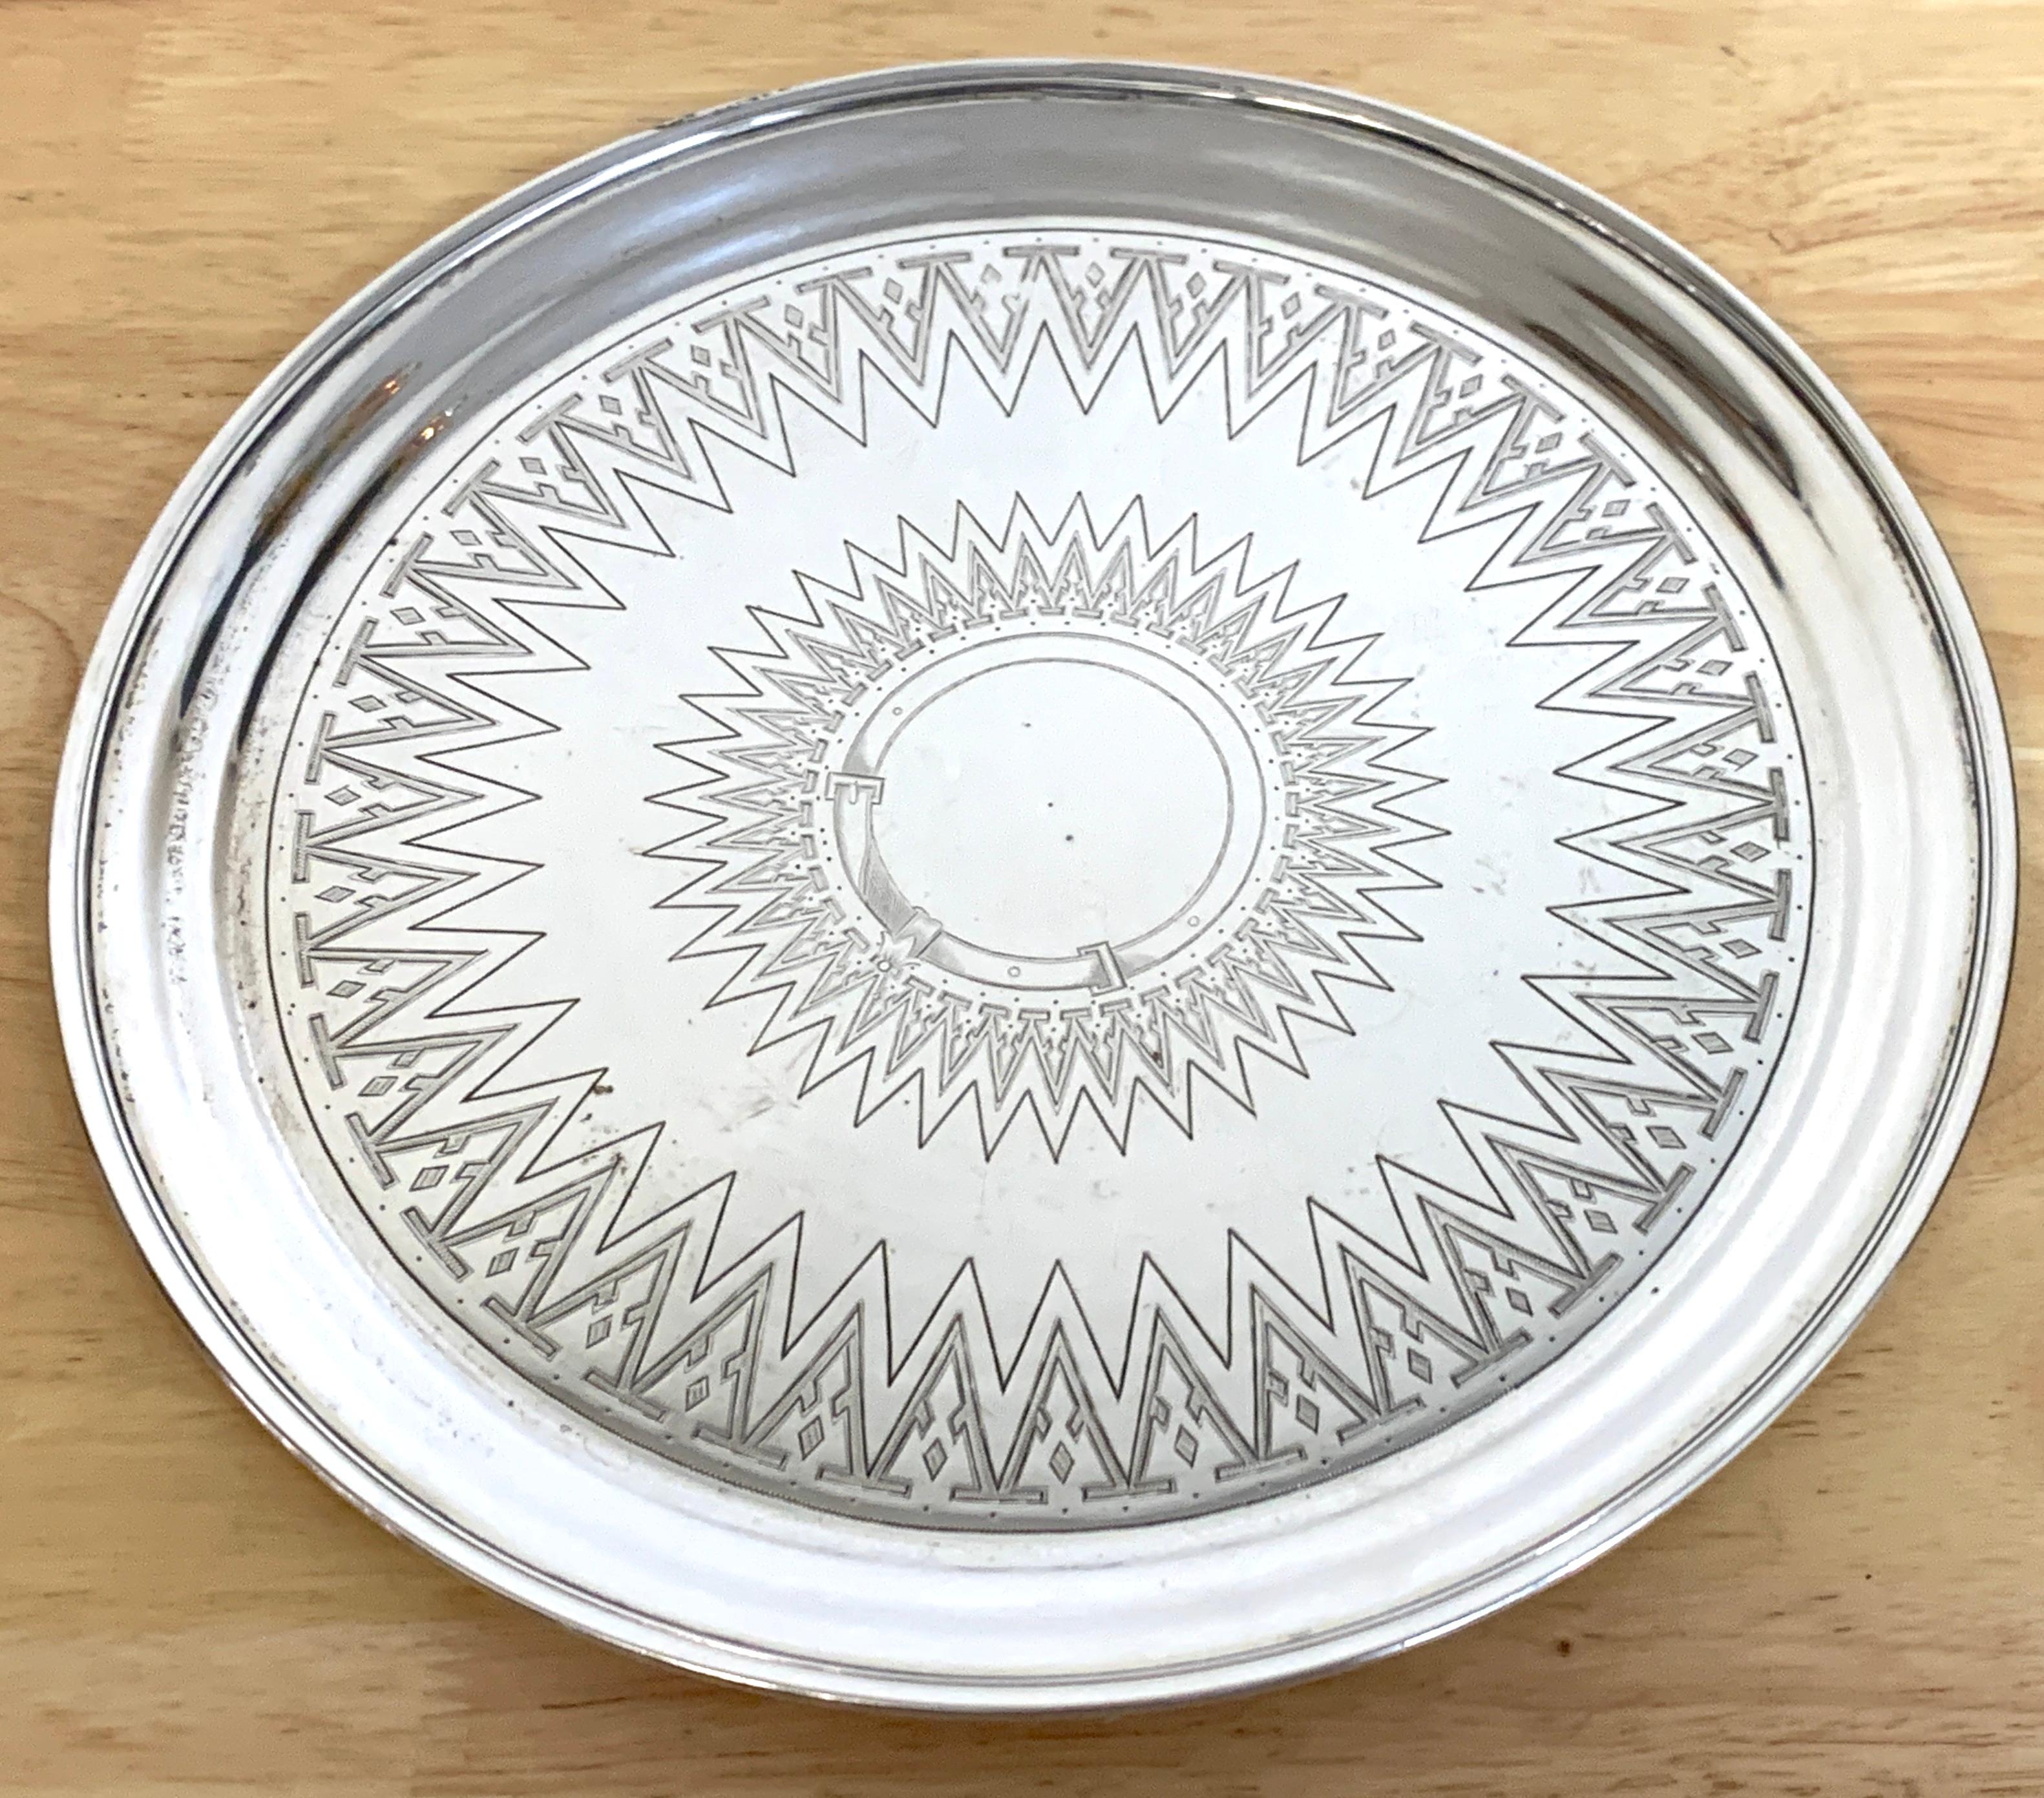 19th century Russian silver engraved salver, 1879
With beautiful intricate bright decoration, with center belt motif cartouche
Numerous hallmarks, weighs 15.6 Troy Ounces.